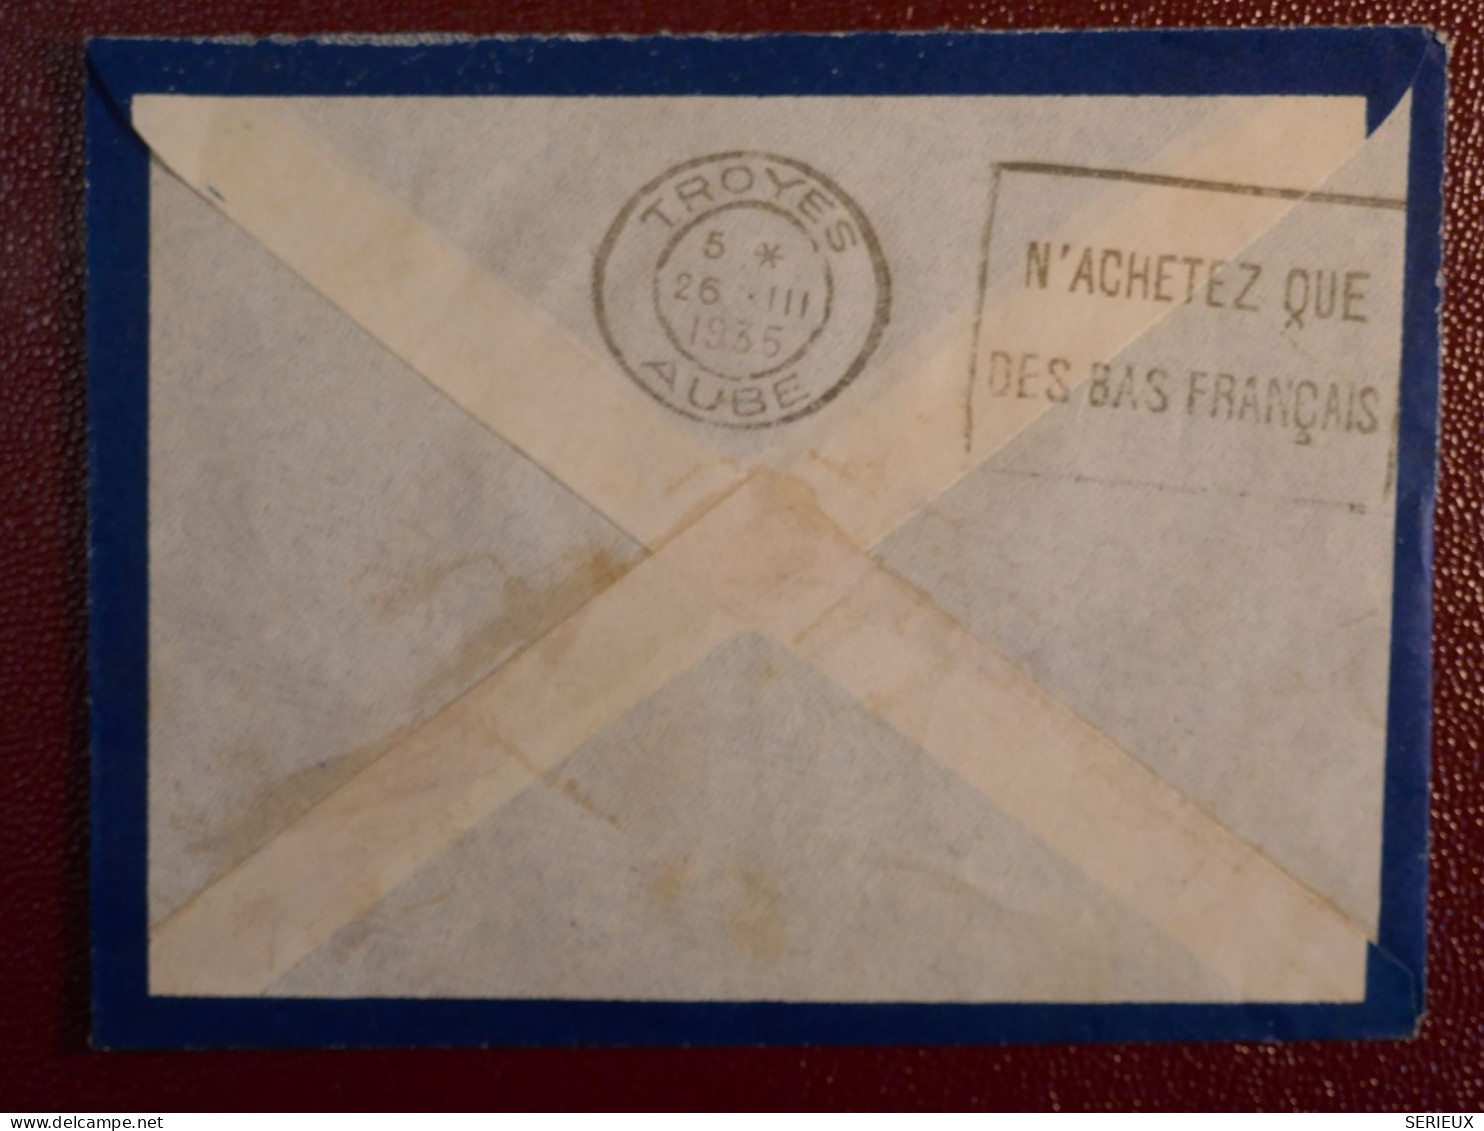 INDOCHINE   LETTRE RR ENTIER  1935 1934 HANOI TONKIN  A HERLEIN  TROYES FRANCE PROB.  +  + AFF. INTERESSANT+DP6 - Covers & Documents